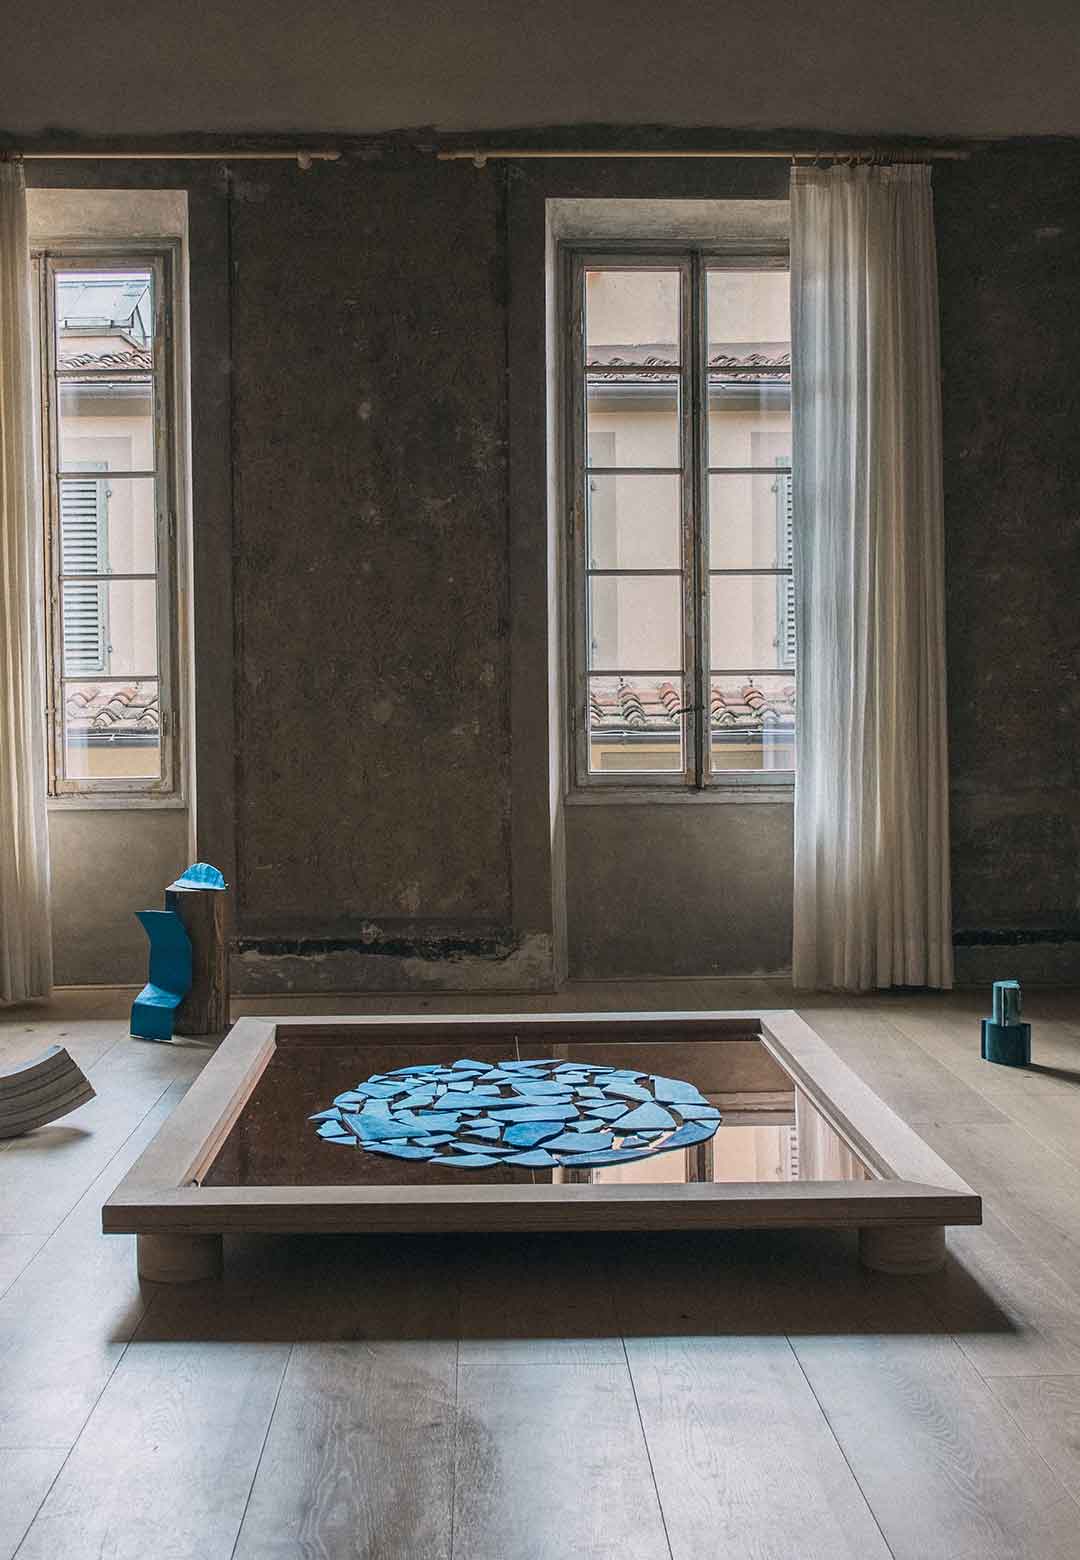 Studiopepe x Numeroventi unveil ‘Out of the Blue’ in Florence